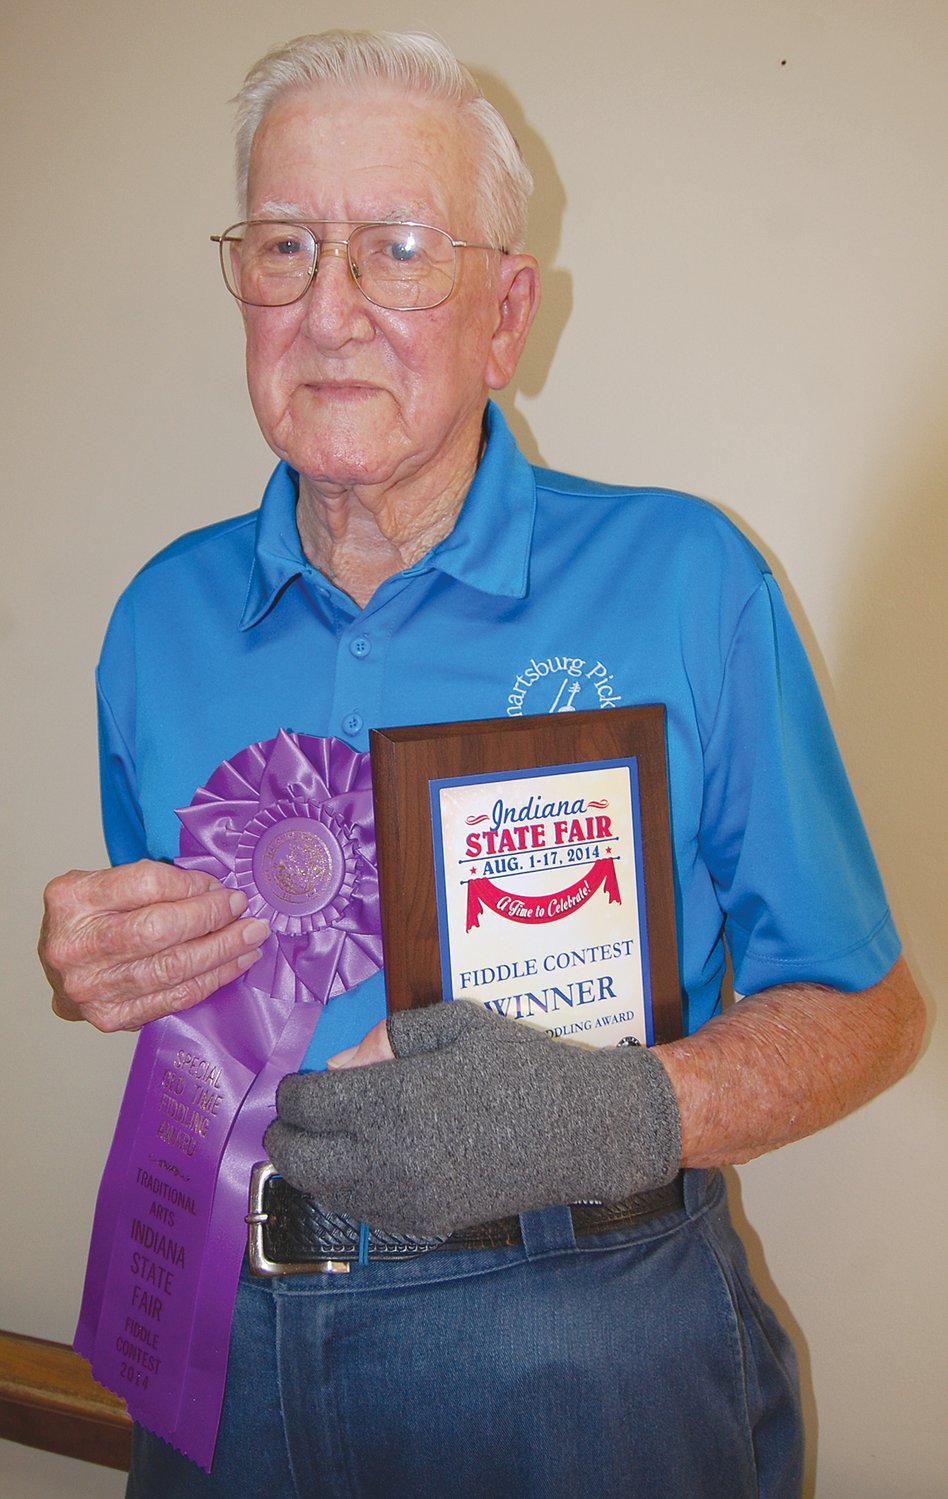 Archie Krout poses with his ribbon and plaque that he was awarded at the Indiana State Fair for his fiddle playing in 2014.